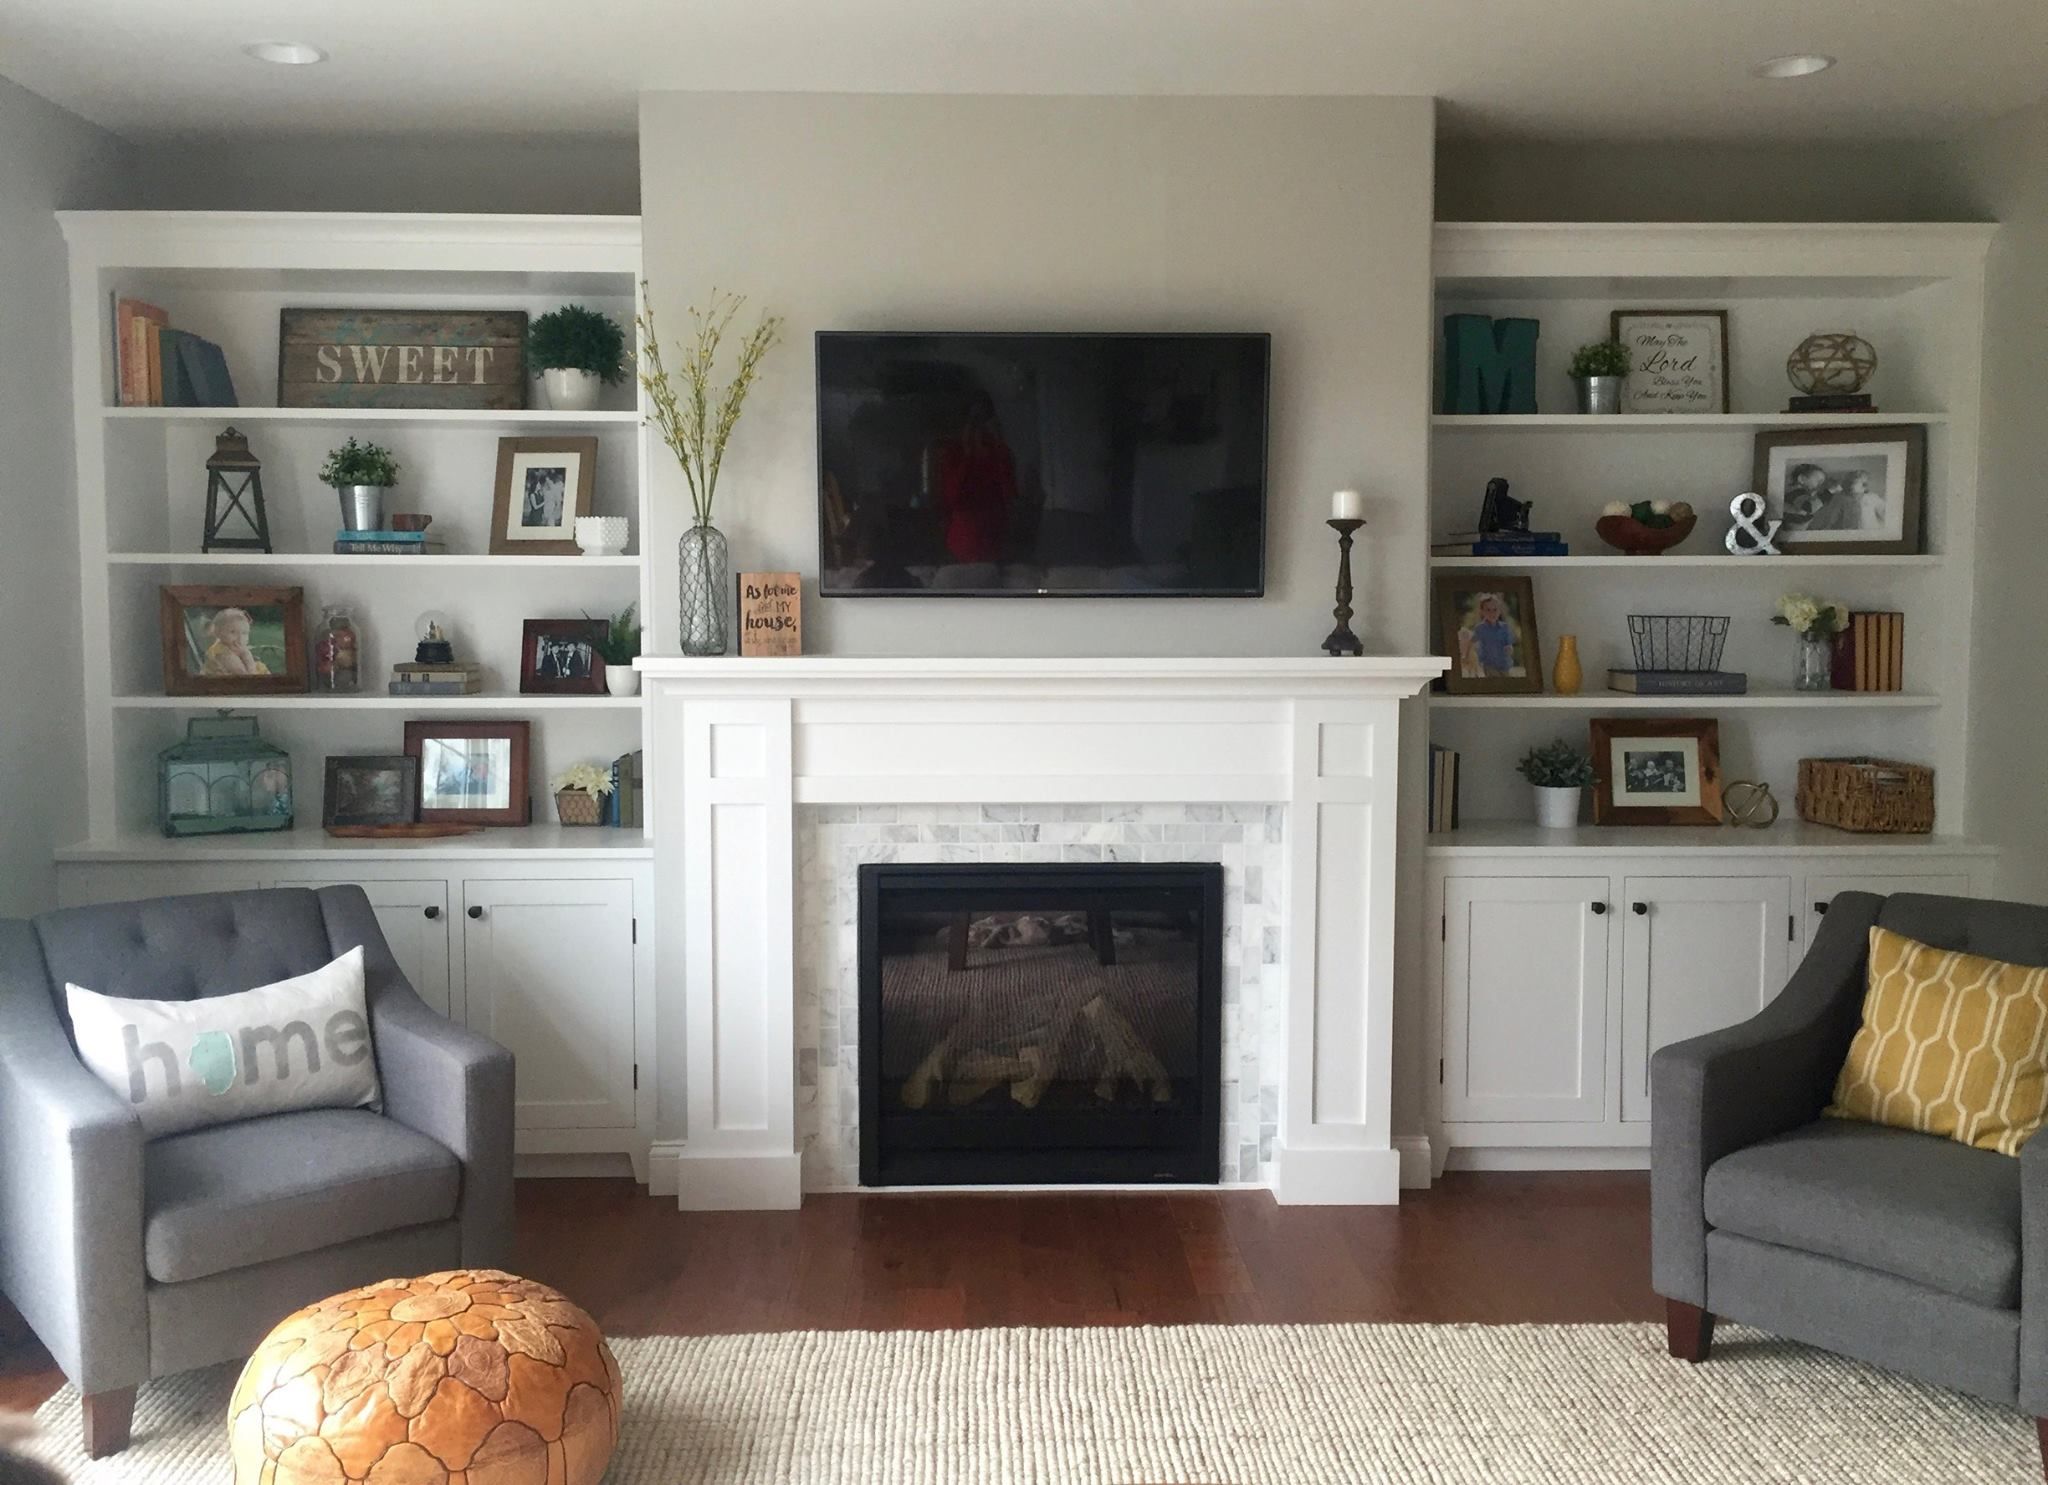 Fireplace Experts Luxury Instructions to Build This Fireplace Mantel with Built In